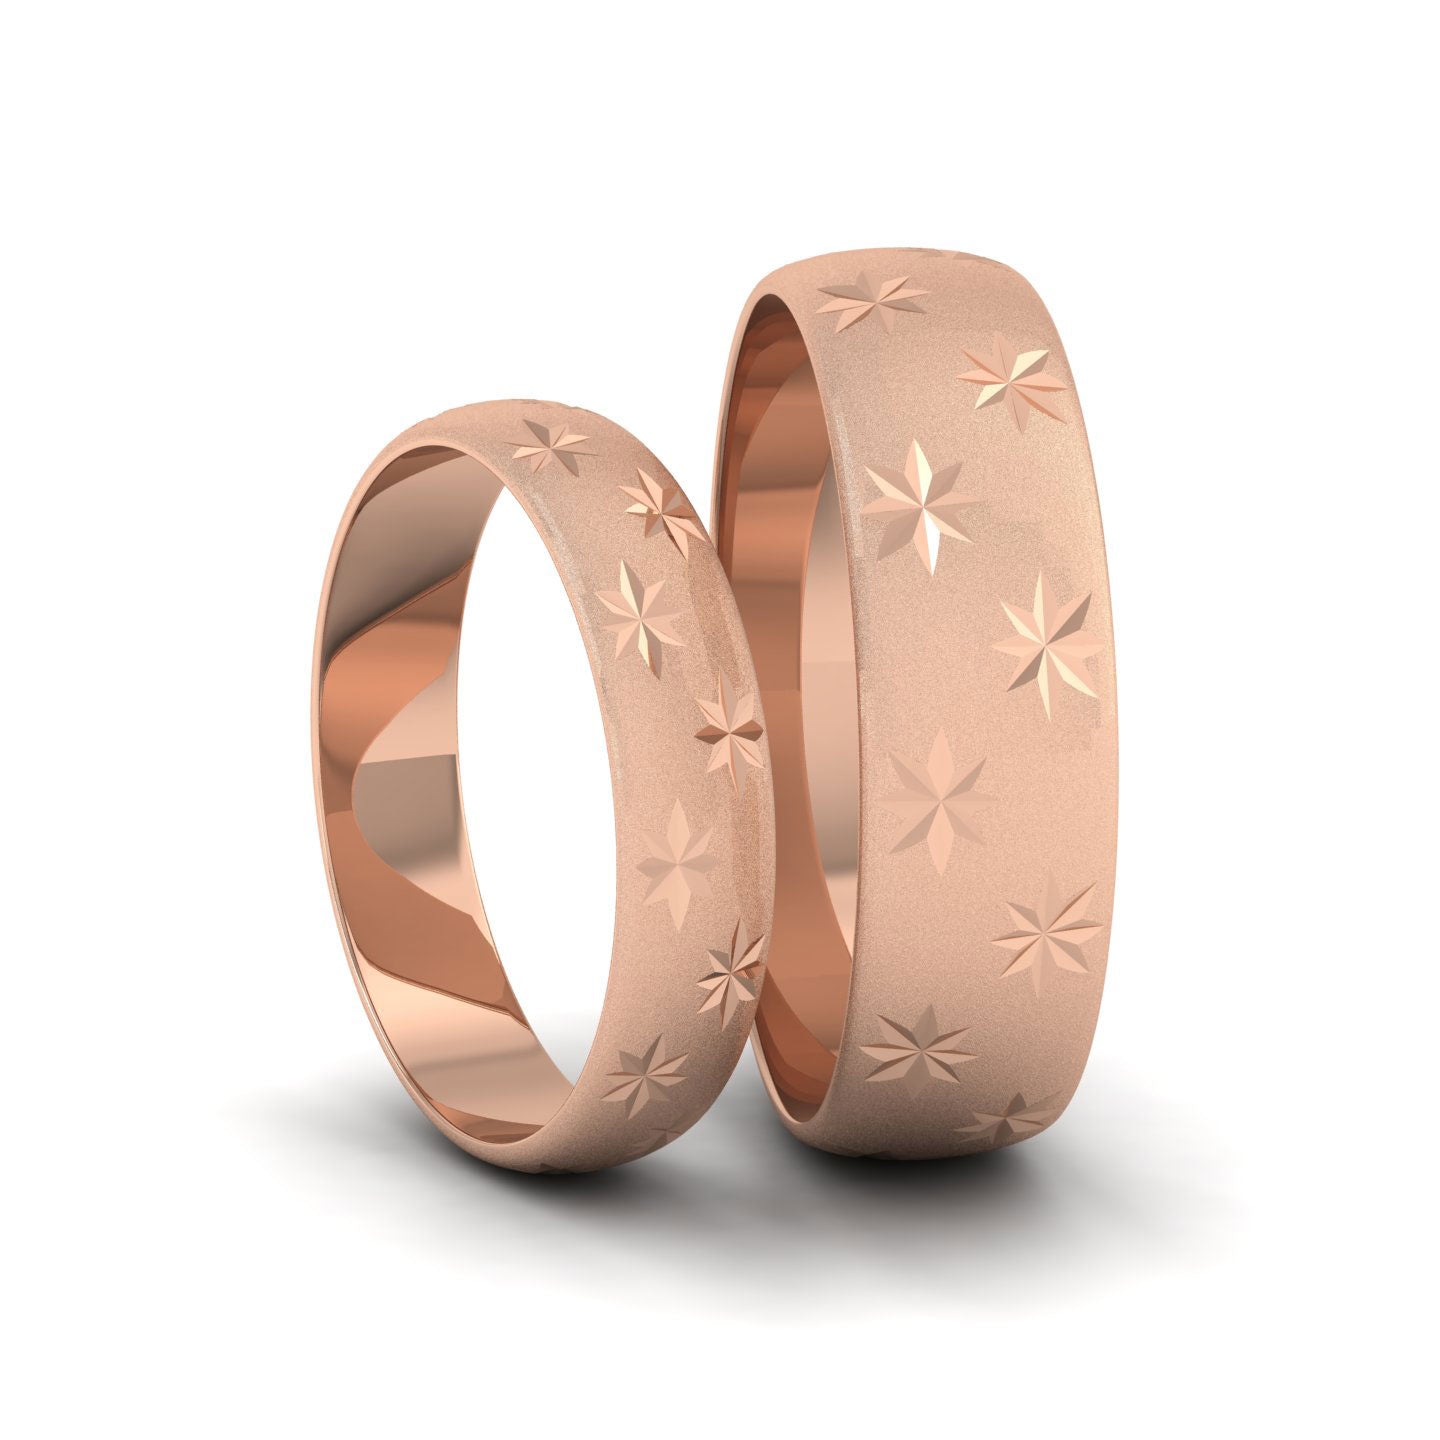 Star Patterned 9ct Rose Gold 4mm Wedding Ring